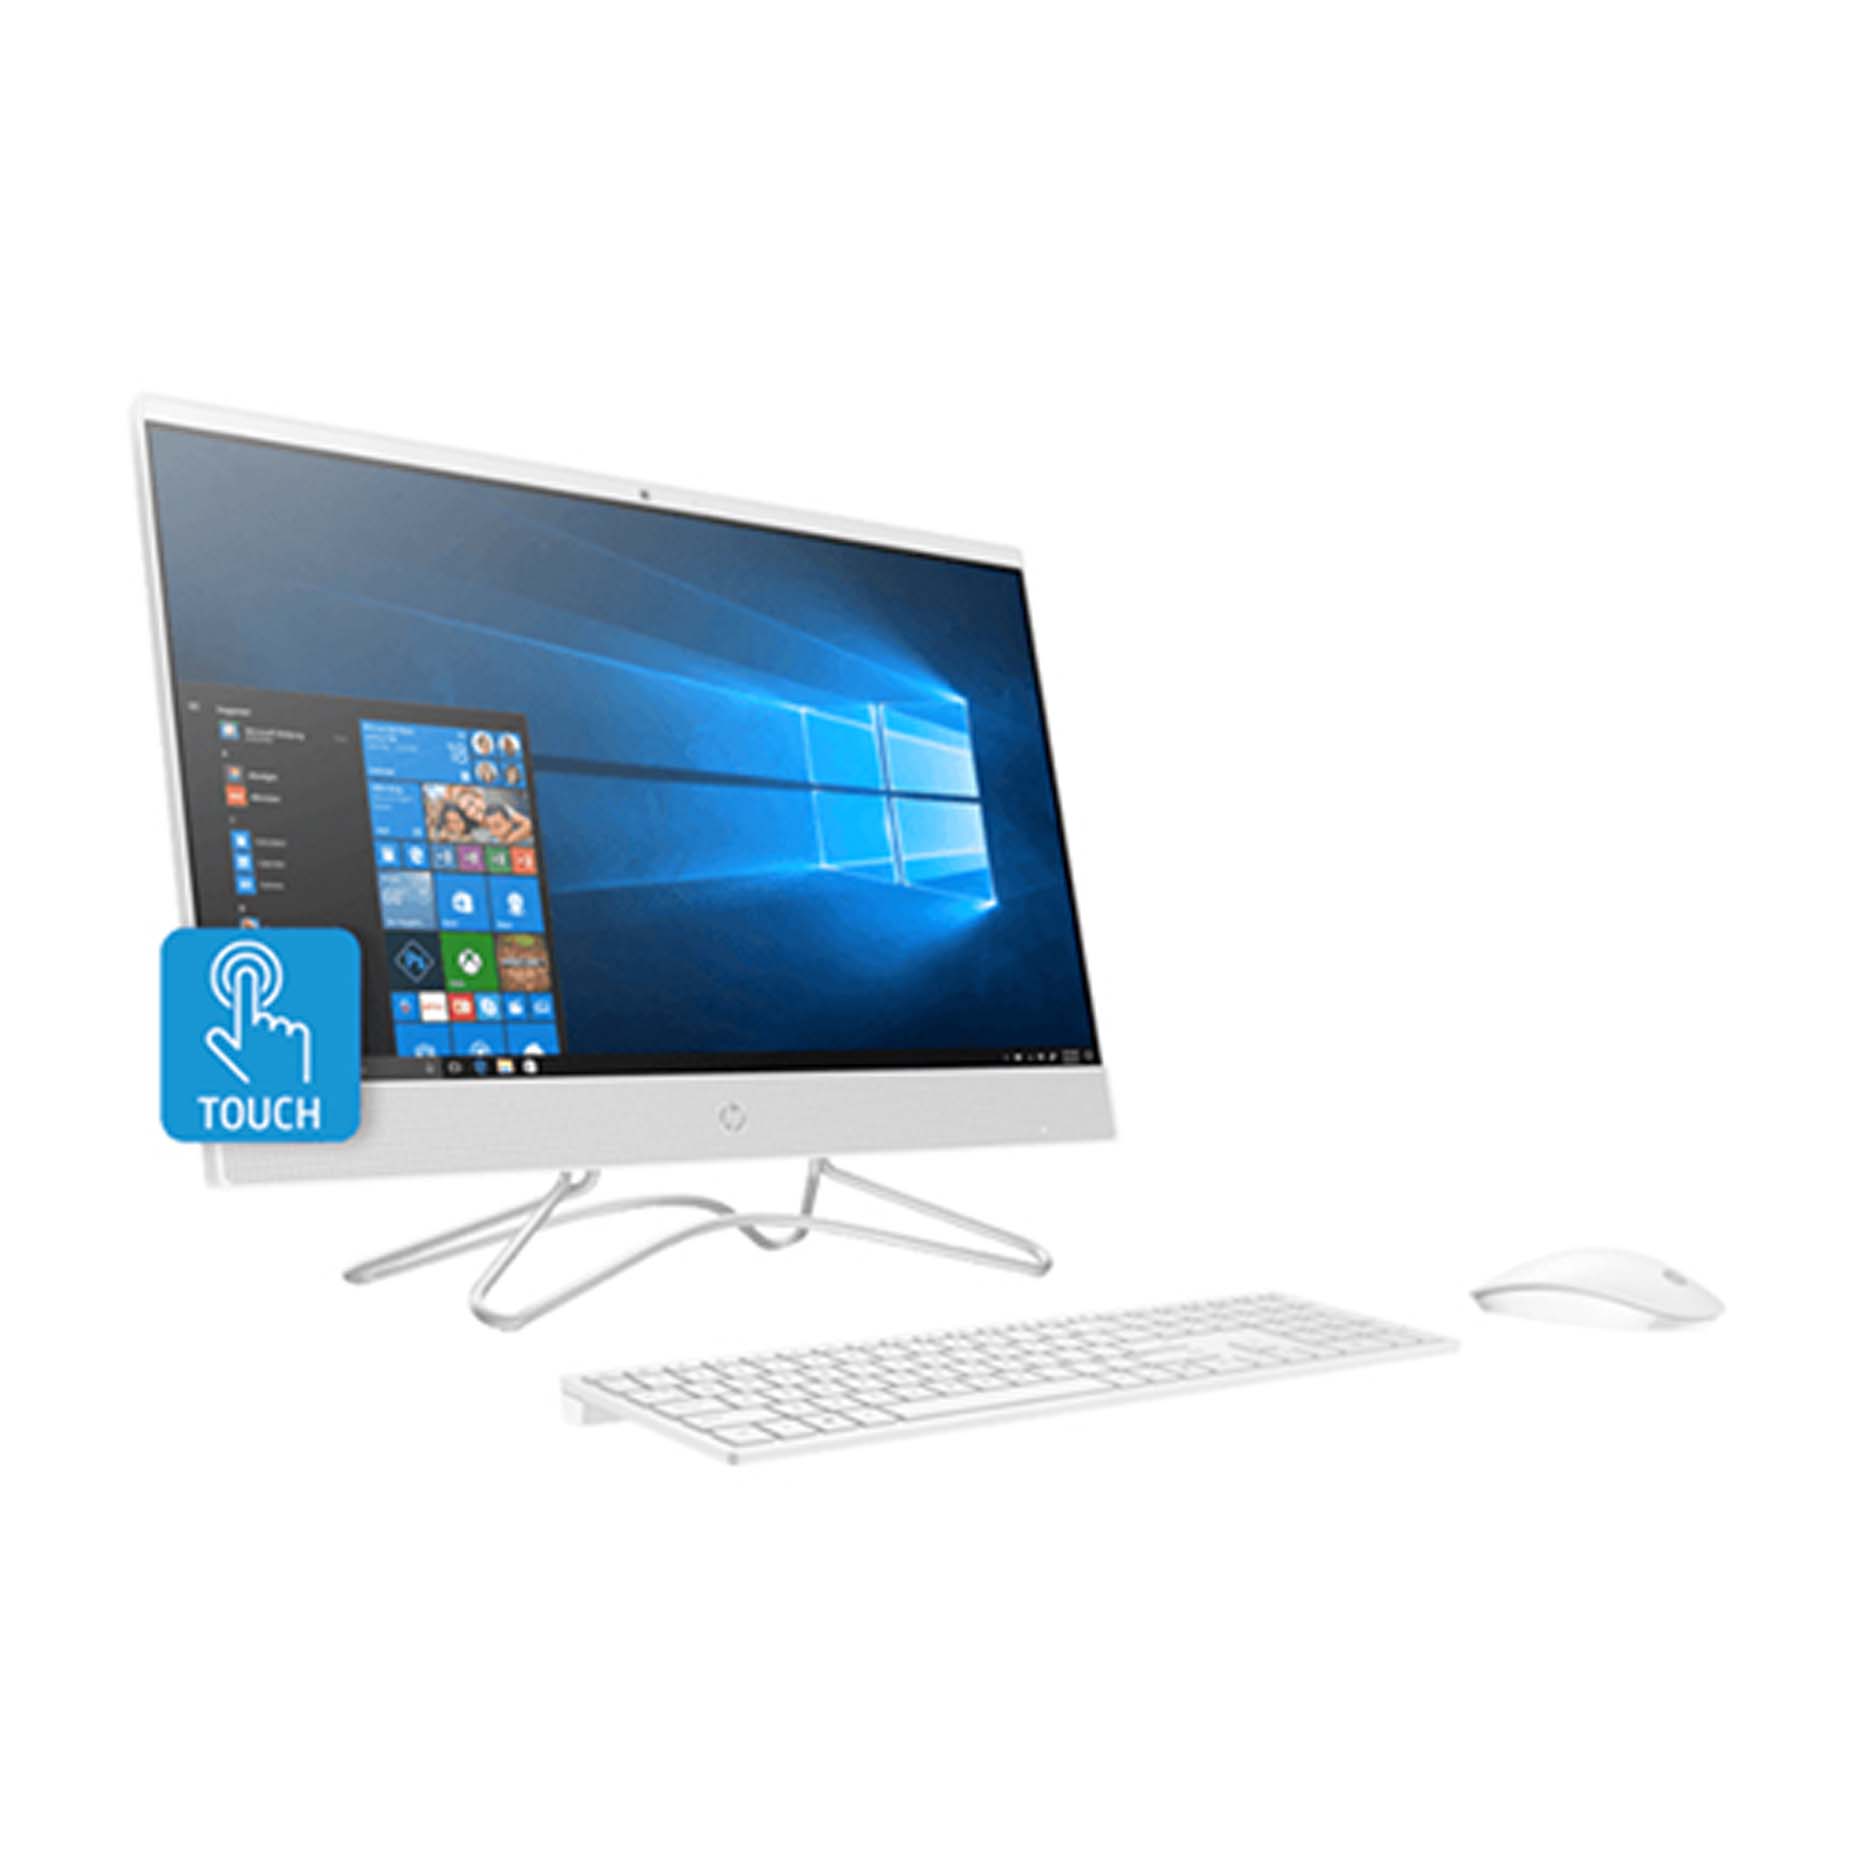 Harga HP 24-F0053D All-in-One PC intel Core i5-8400T 4GB 1TB  MX110 2GB Win10 Home 23.8 Inch Touch